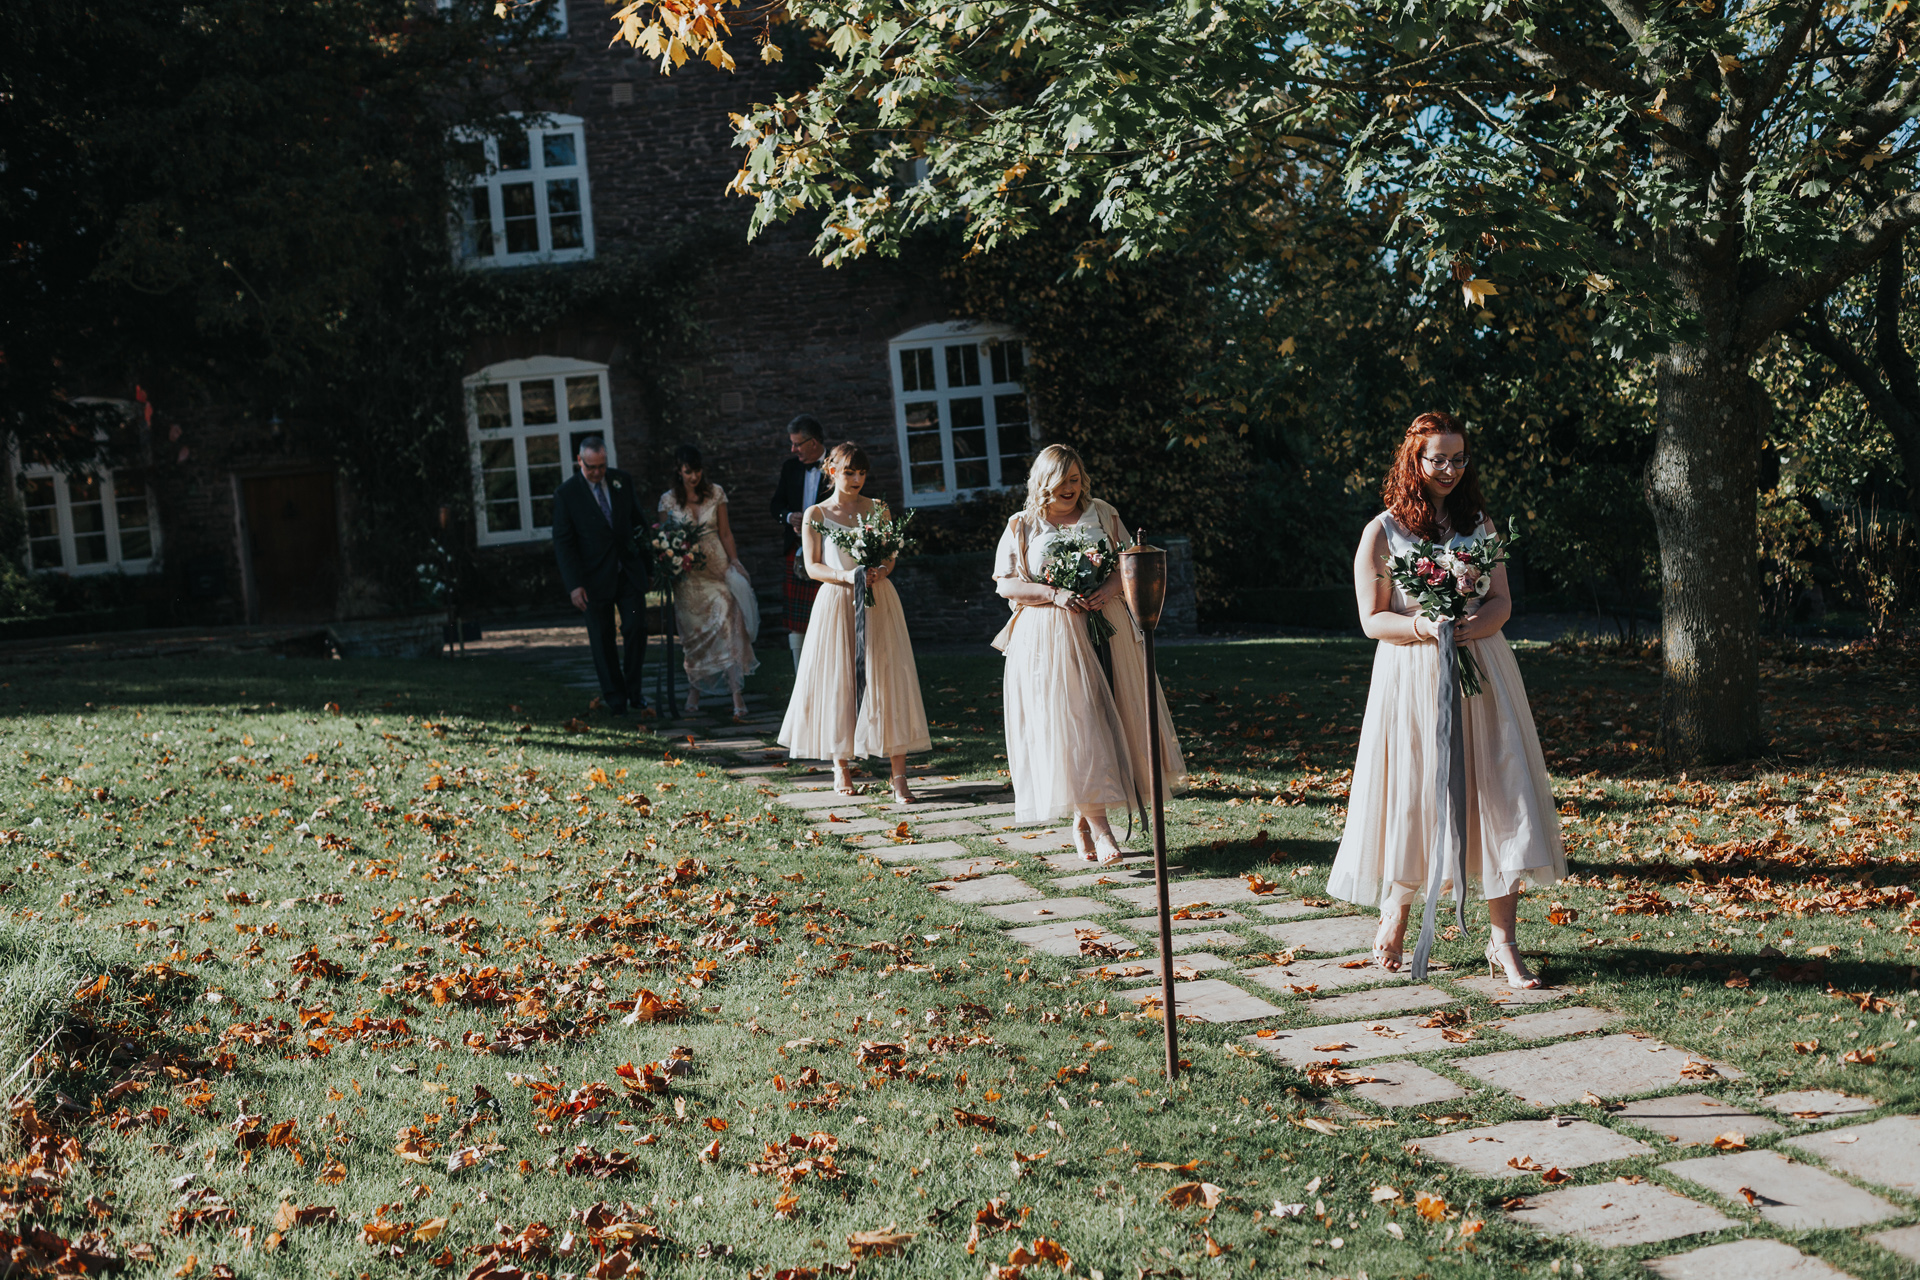 The bridesmaids lead the way across the lawn towards the ceremony room. 